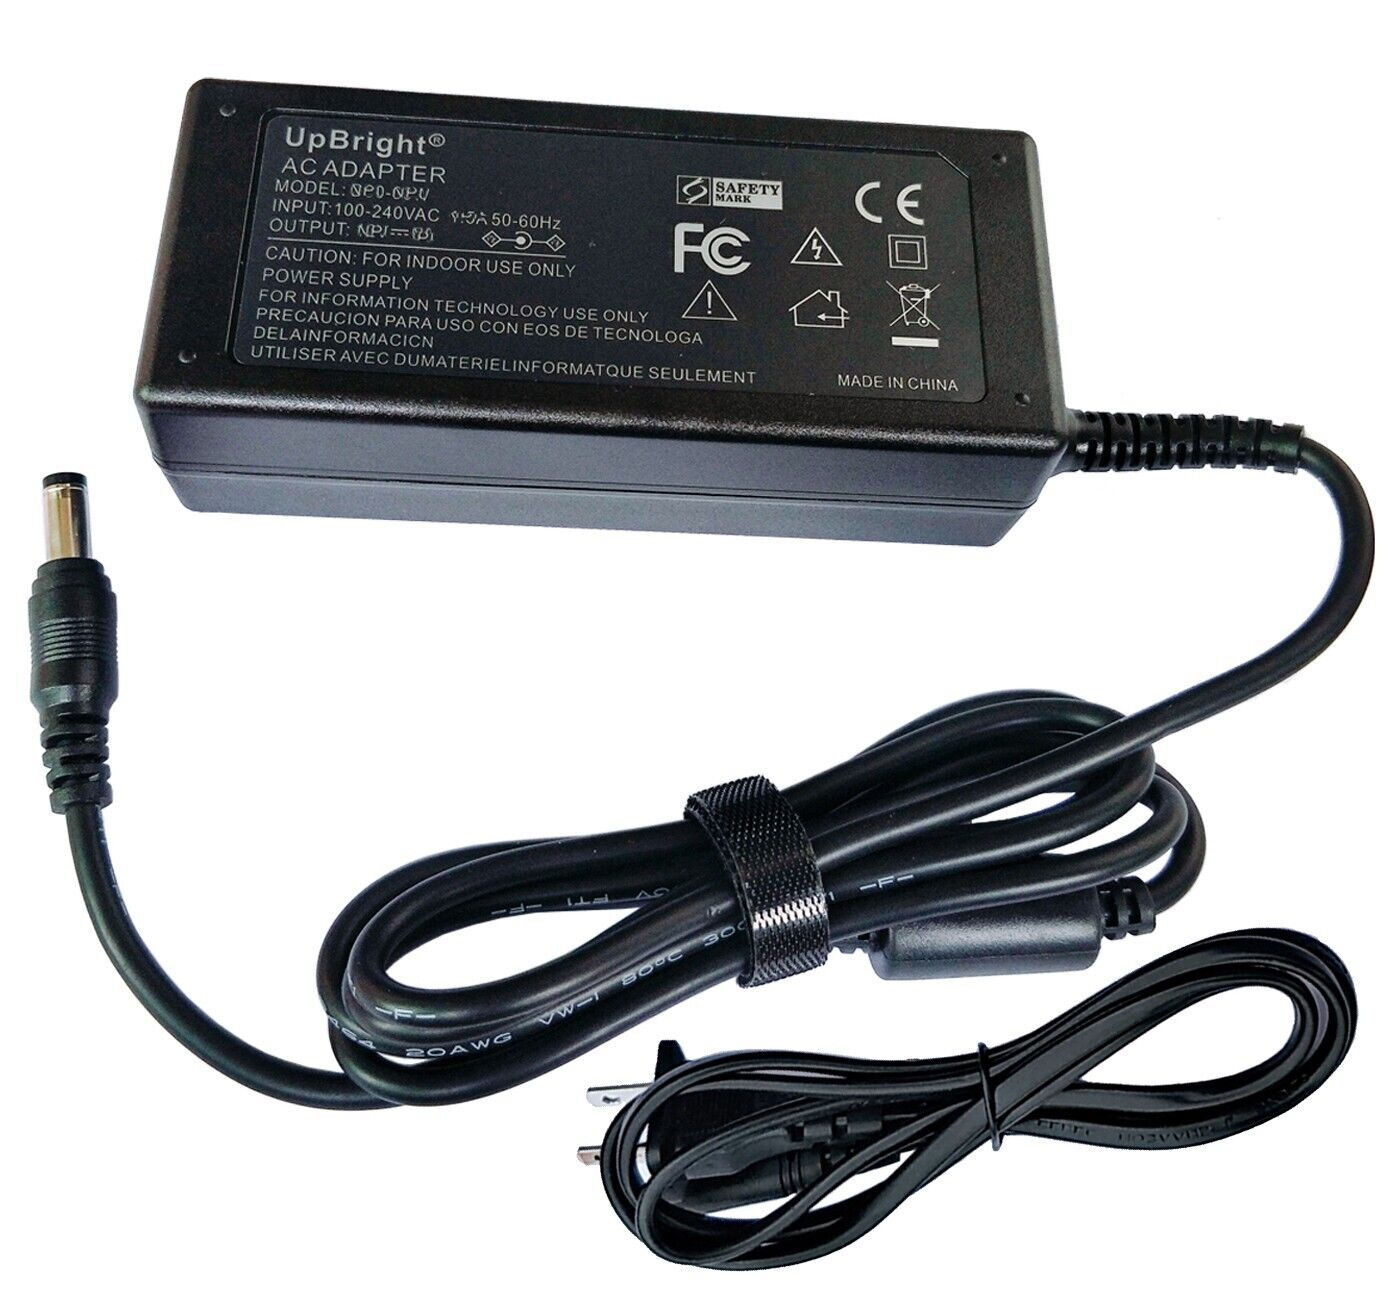 AC Adapter For Studebaker SB2165 Retro Avanti Portable Stereo Boombox DC Charger